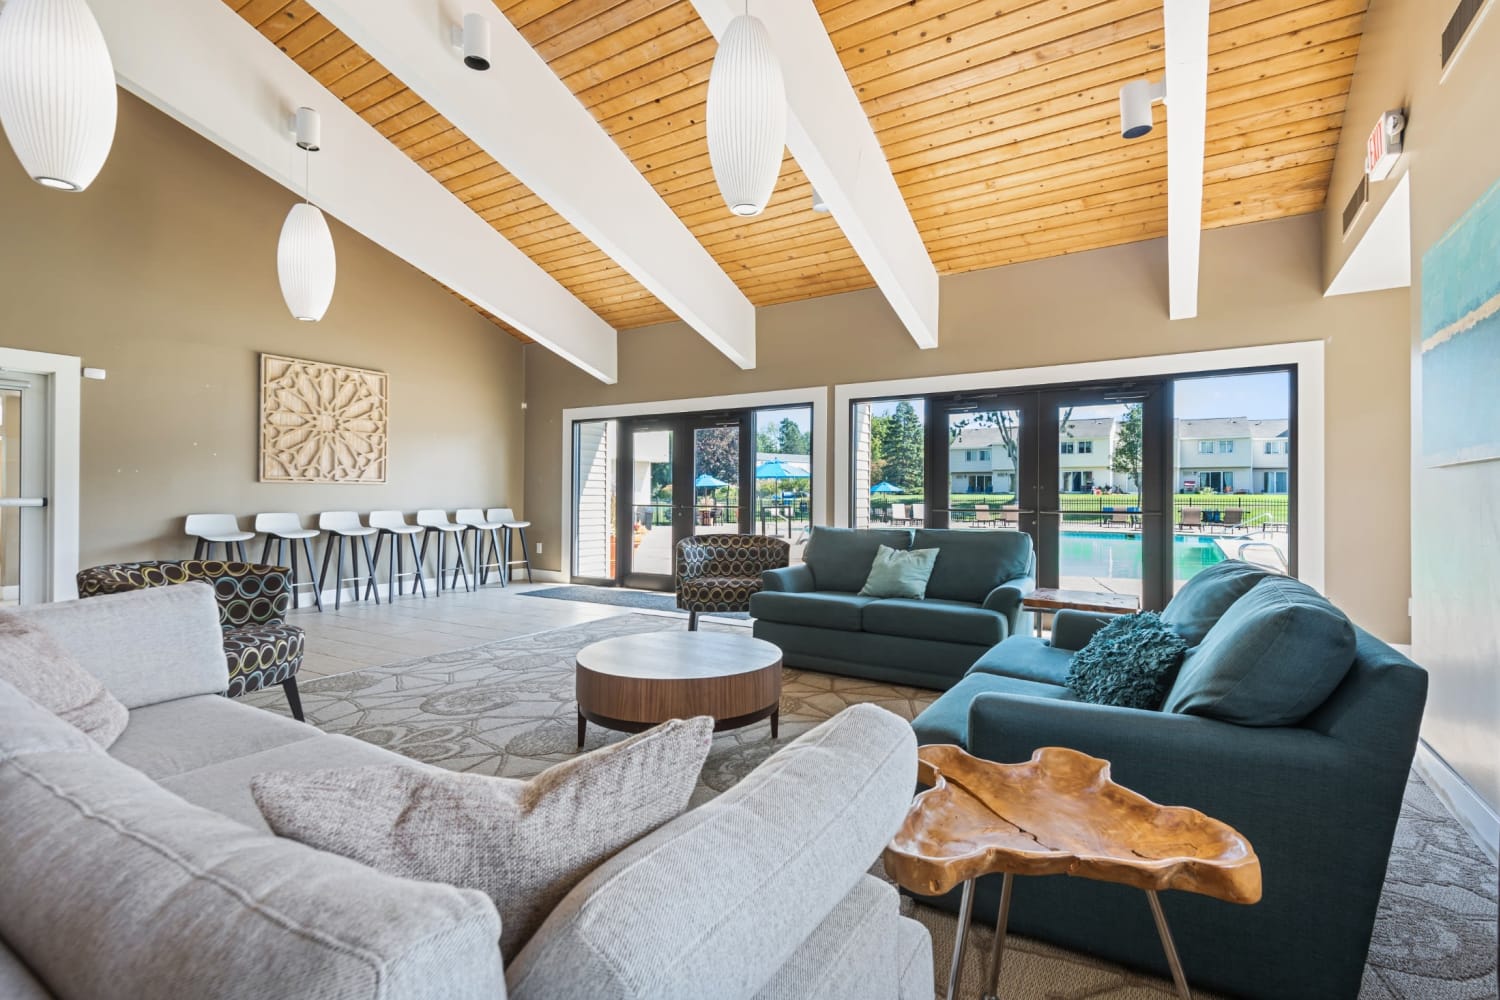 Comfortable resident clubhouse sitting area at Penbrooke Meadows in Penfield, New York